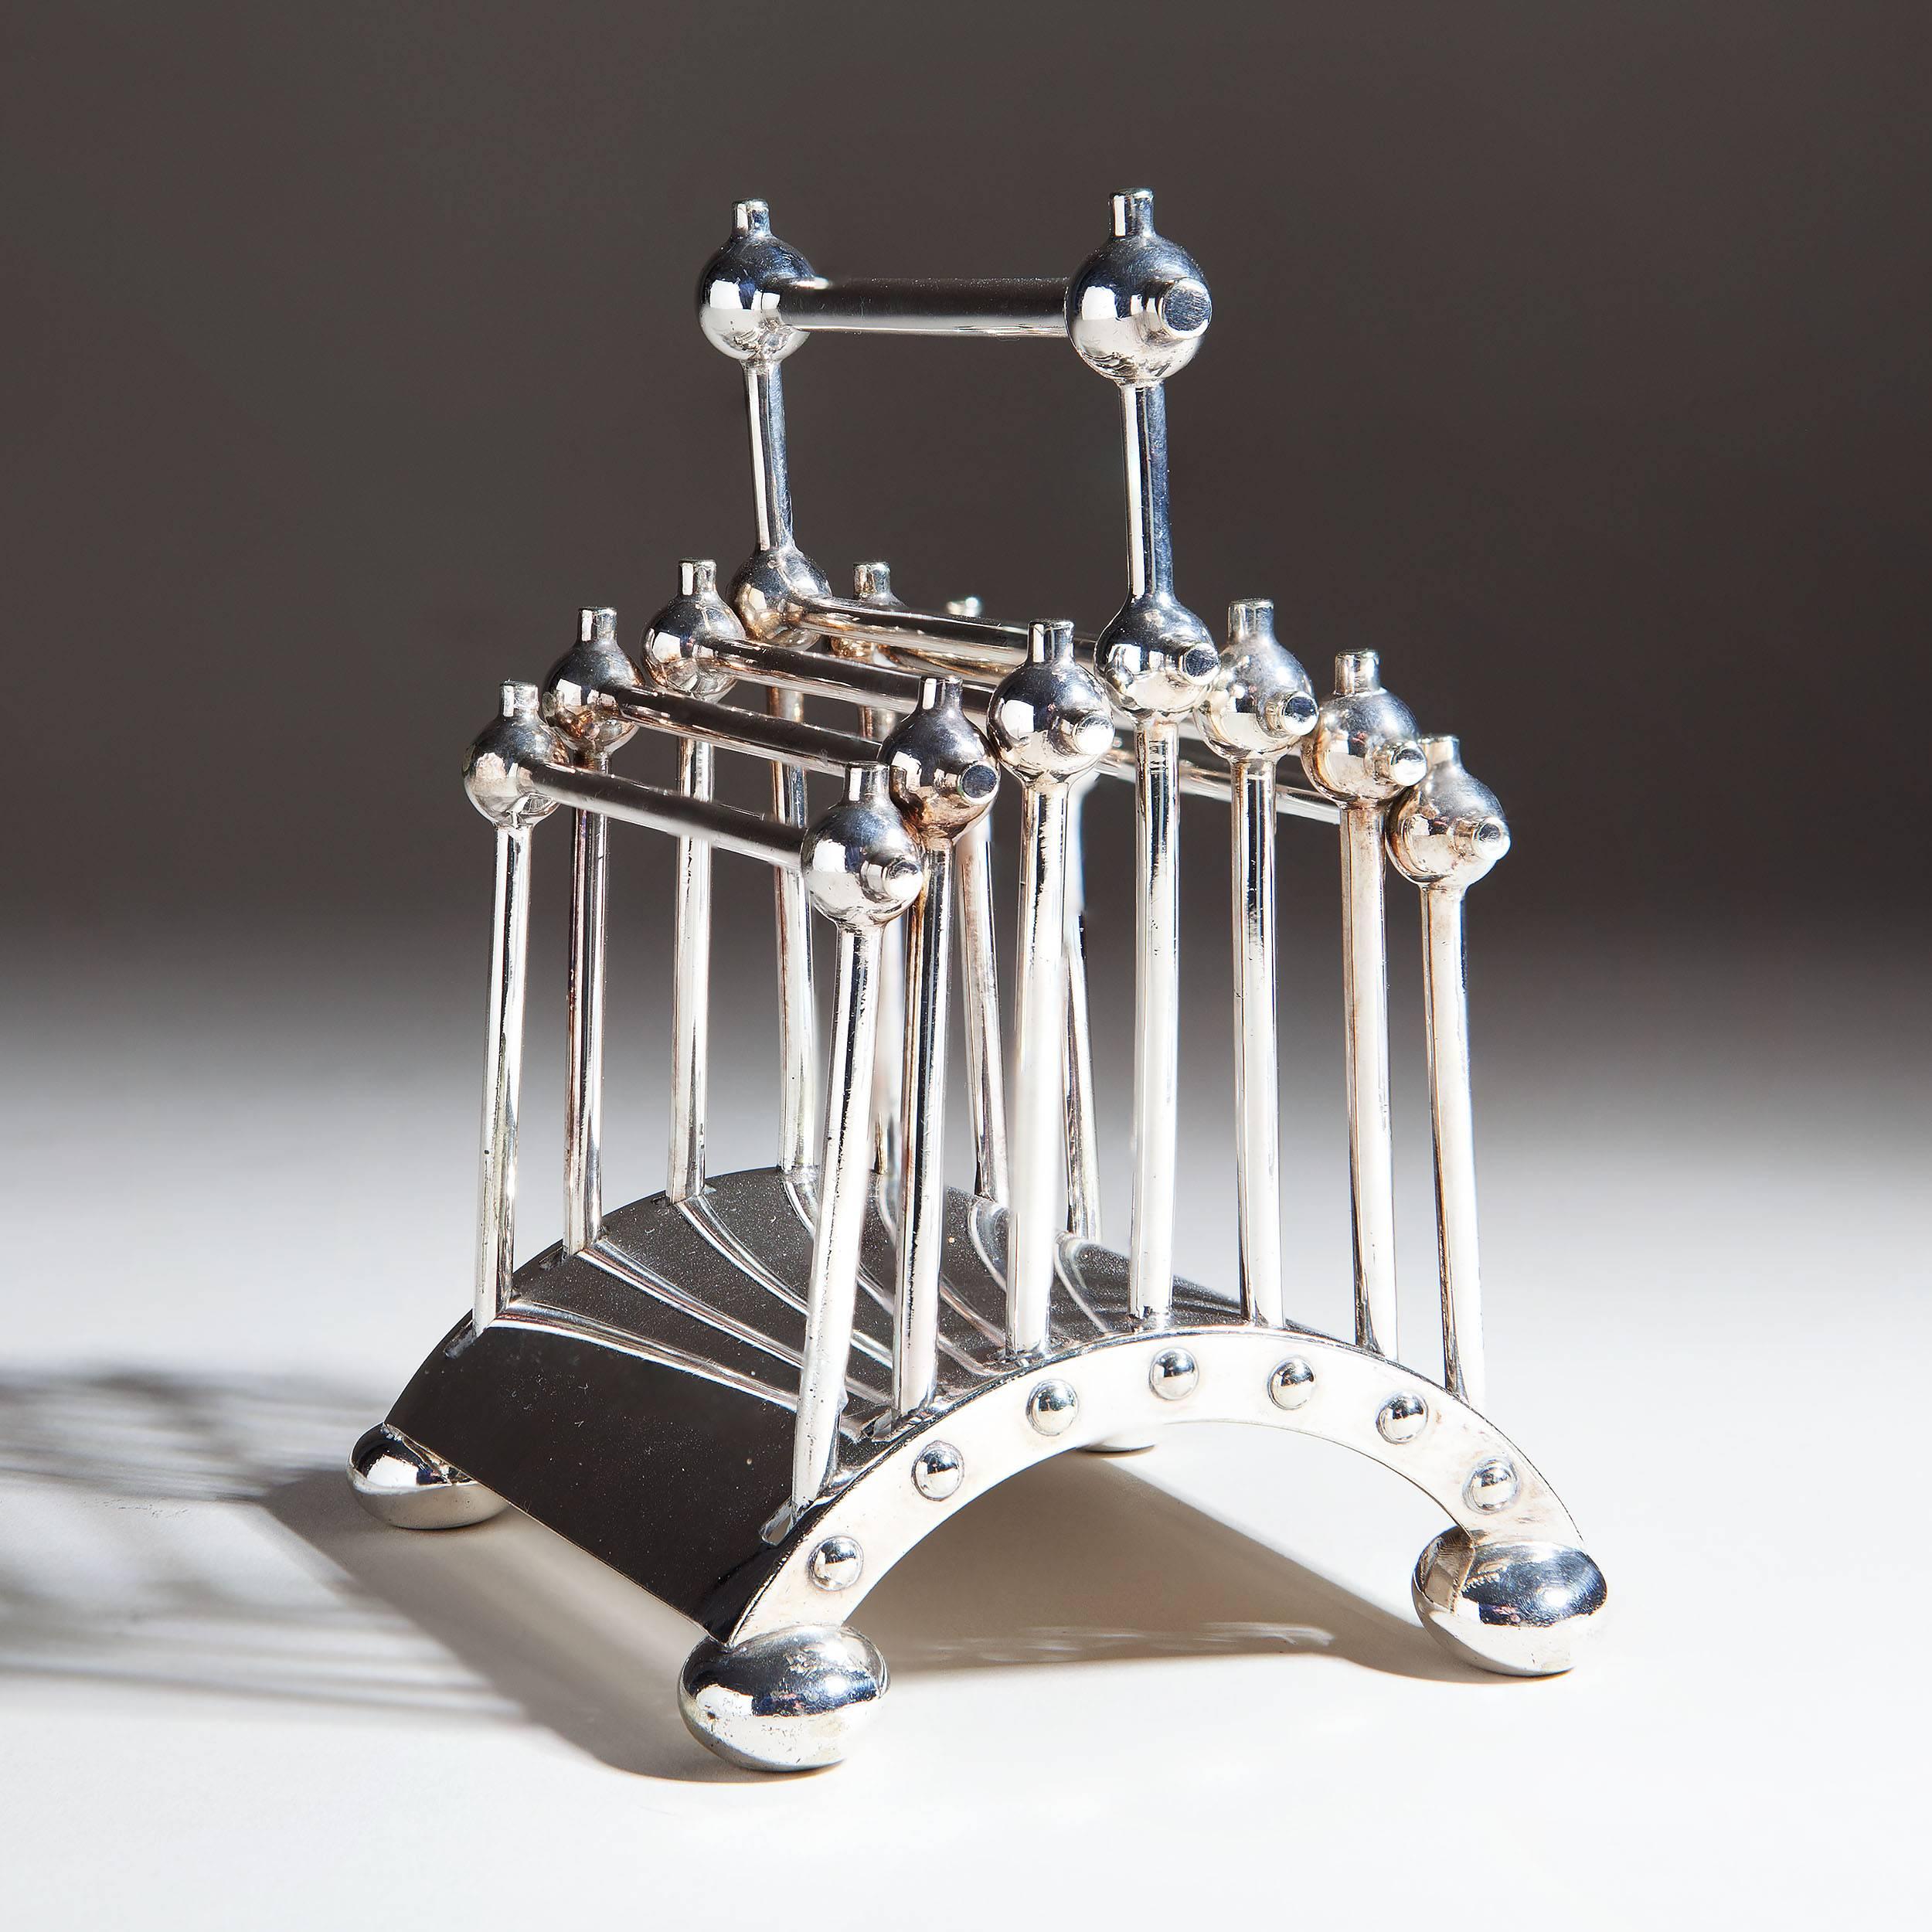 A Hukin and Heath articulated letter rack designed by Dr Christopher Dresser, model no.2555, rod and ball construction on arched base, stamped marks, silver plate. 

Measures: 12.5cm high.
​
Literature:
Michael Whiteway Dr Christopher Dresser,